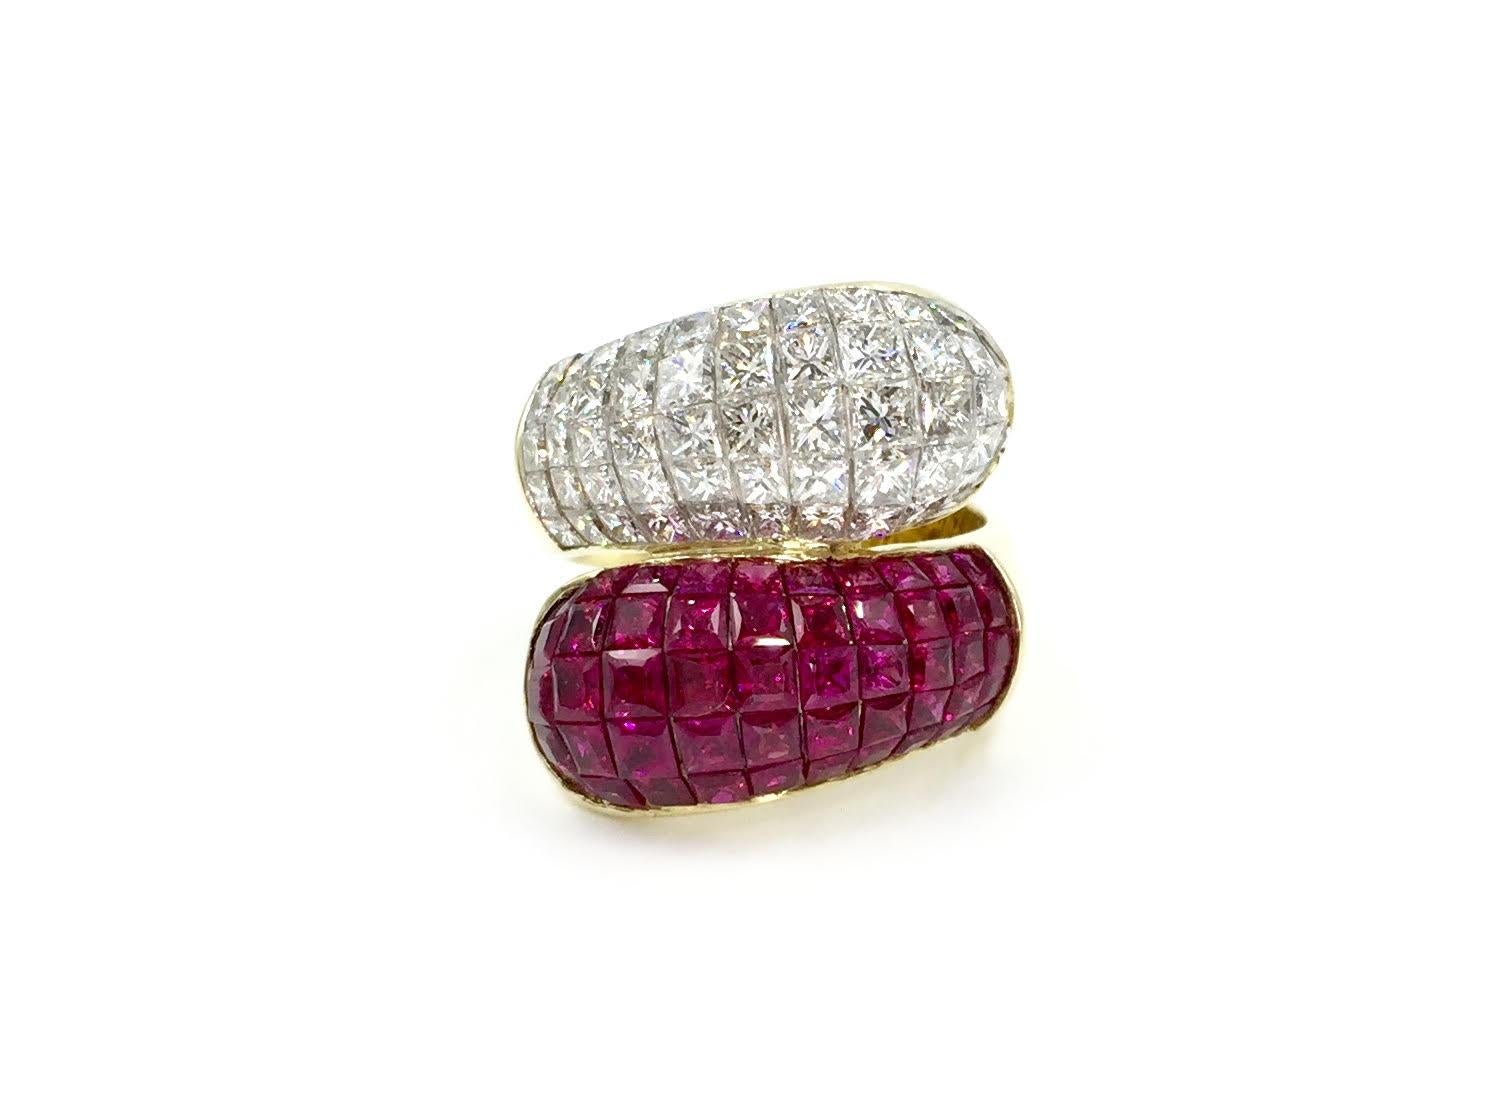 A show stopper from the masters of illusion-set fine jewelry, Quadamas. This gorgeous 18 karat gold bypass style ring features 9.64 carats of stunning princess cut candy apple red rubies and 4.24 carats of high quality princess cut diamonds,